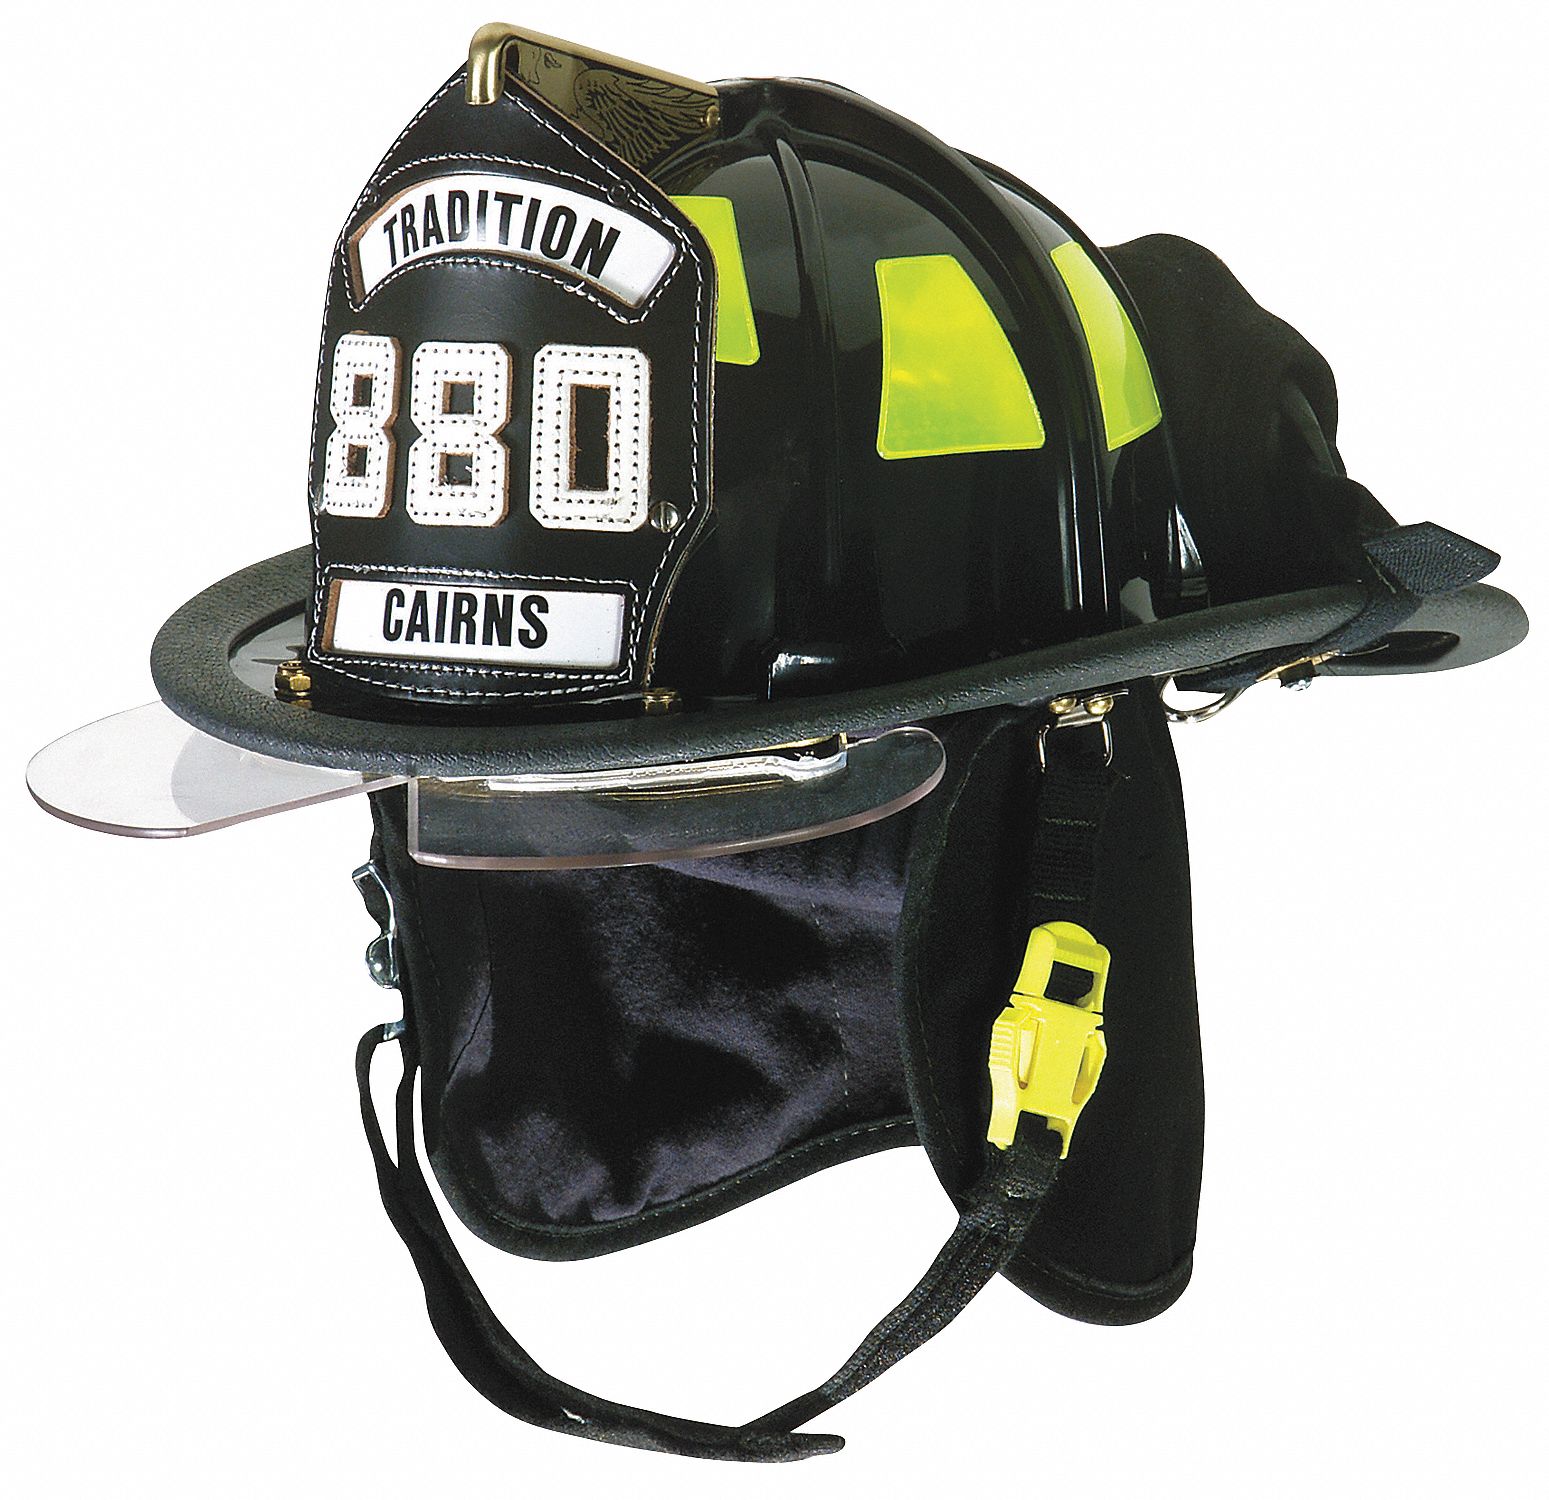 Black Fire Helmet, Shell Material: Thermoplastic, Ratchet Suspension, Fits Hat Size: 5-5/8 to 7 5/8"